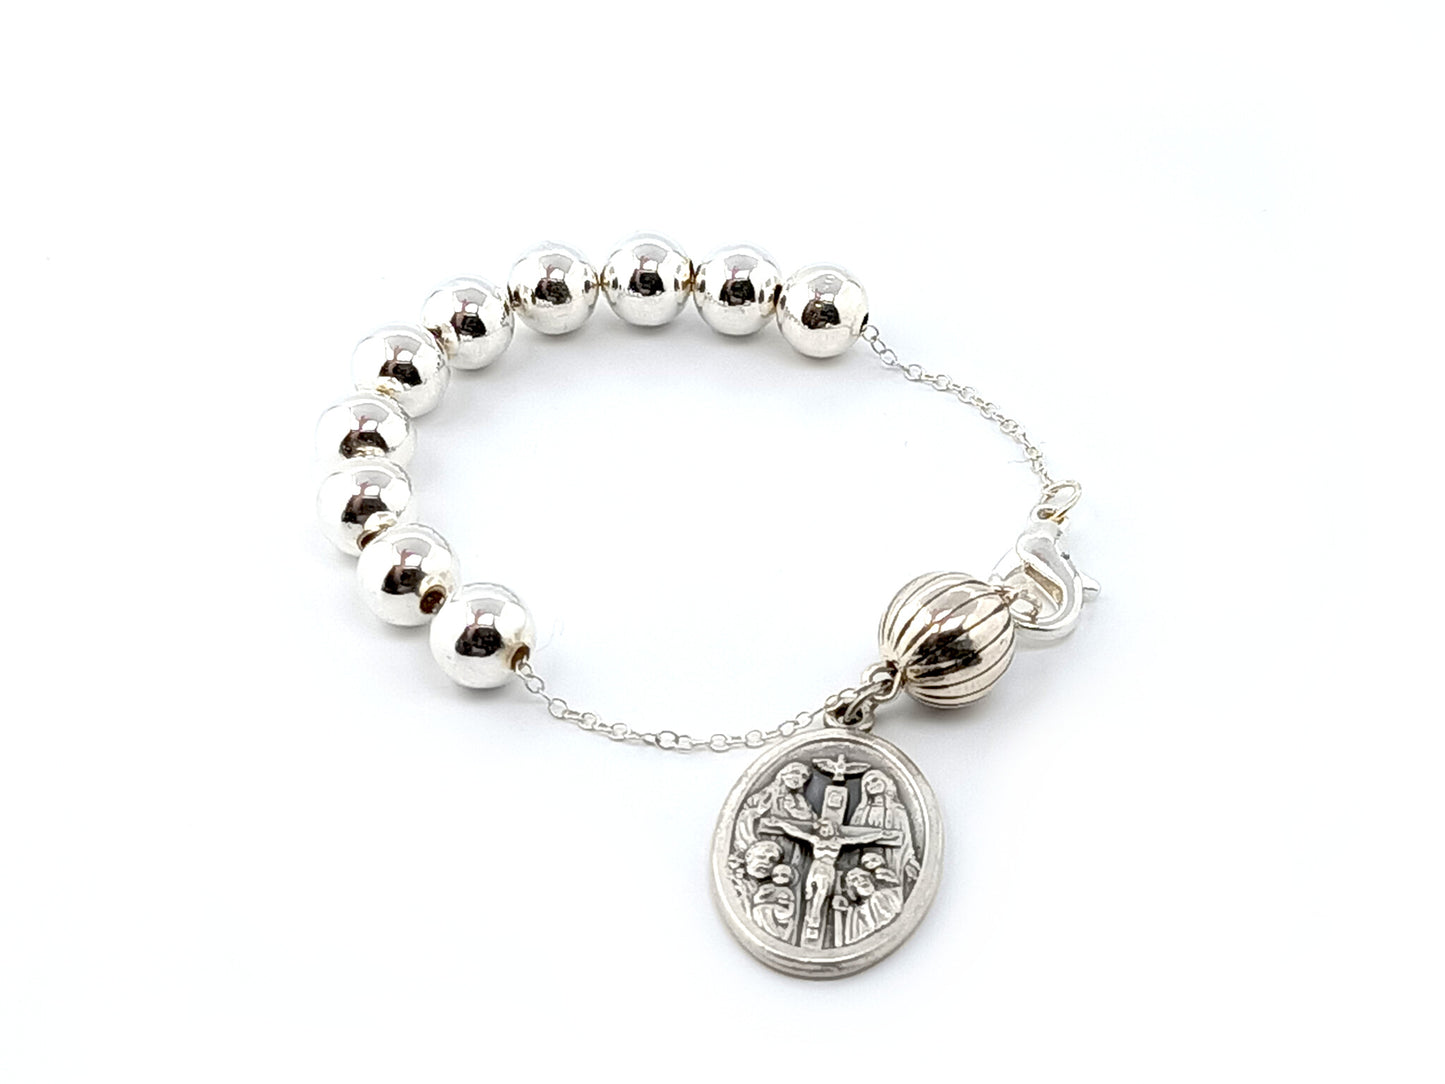 Unique rosary beads genuine 925 sterling silver single decade rosary bracelet with 'I am a catholic' medal, 925 silver beads and Holy Trinity and Saint Joseph medal.